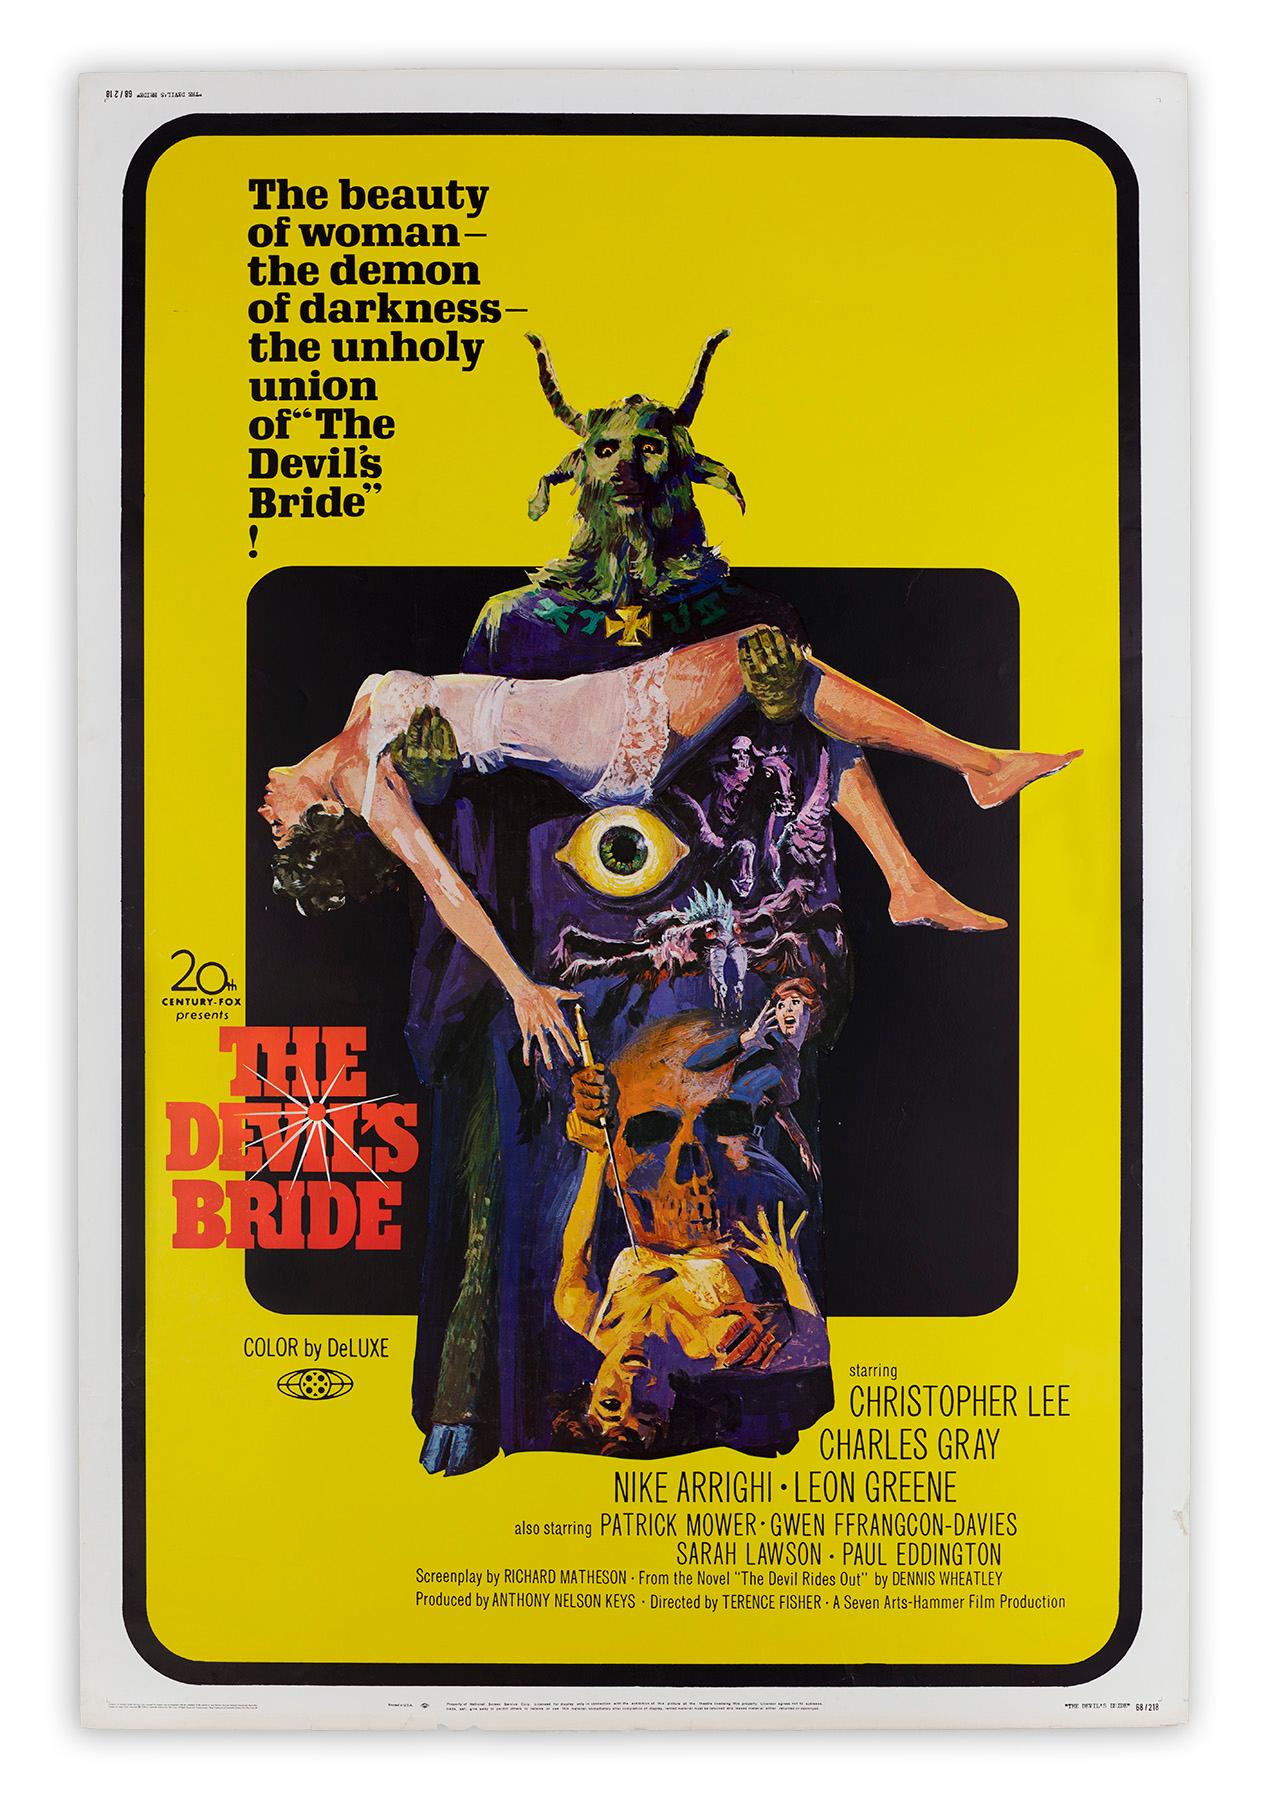 The Devil's Bride, Original psychedelic horror/occult drive-in film poster, 1968 - Print by Unknown